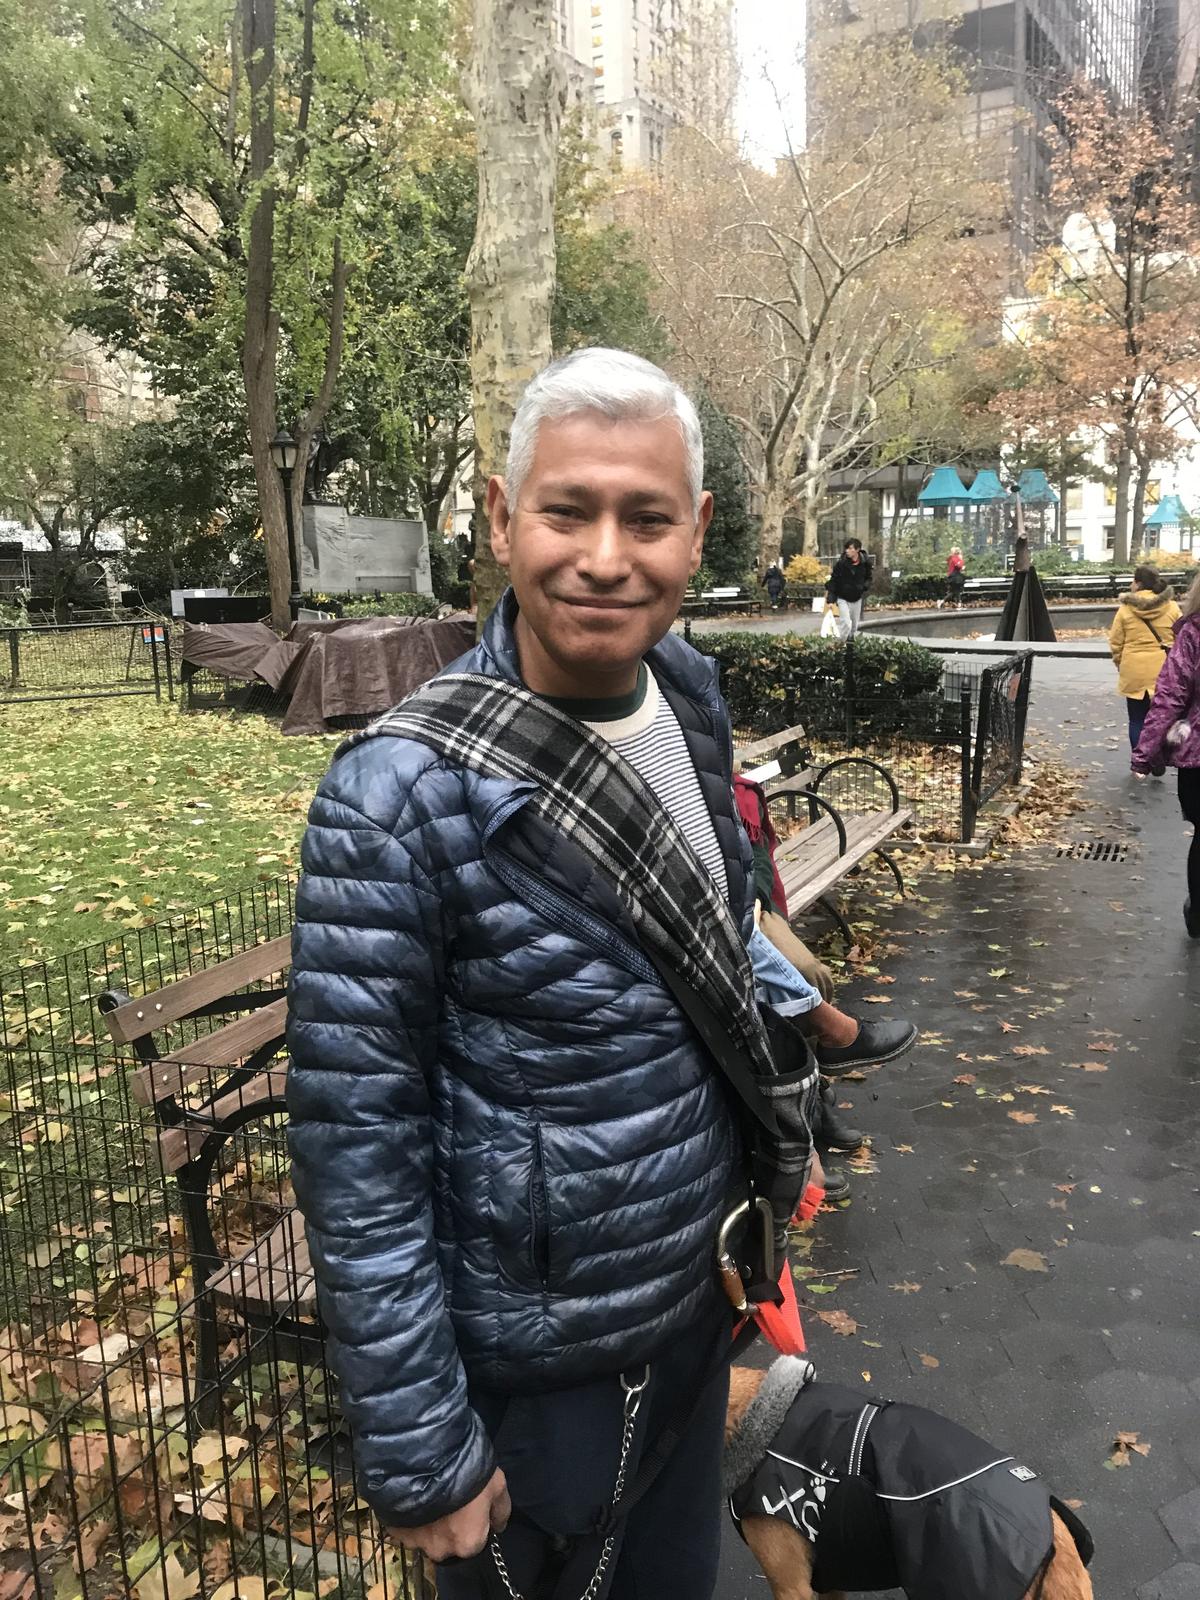 Carlos Rodriguez in Madison Square Park, New York, on Nov. 16, 2018. (Stuart Liess/The Epoch Times)